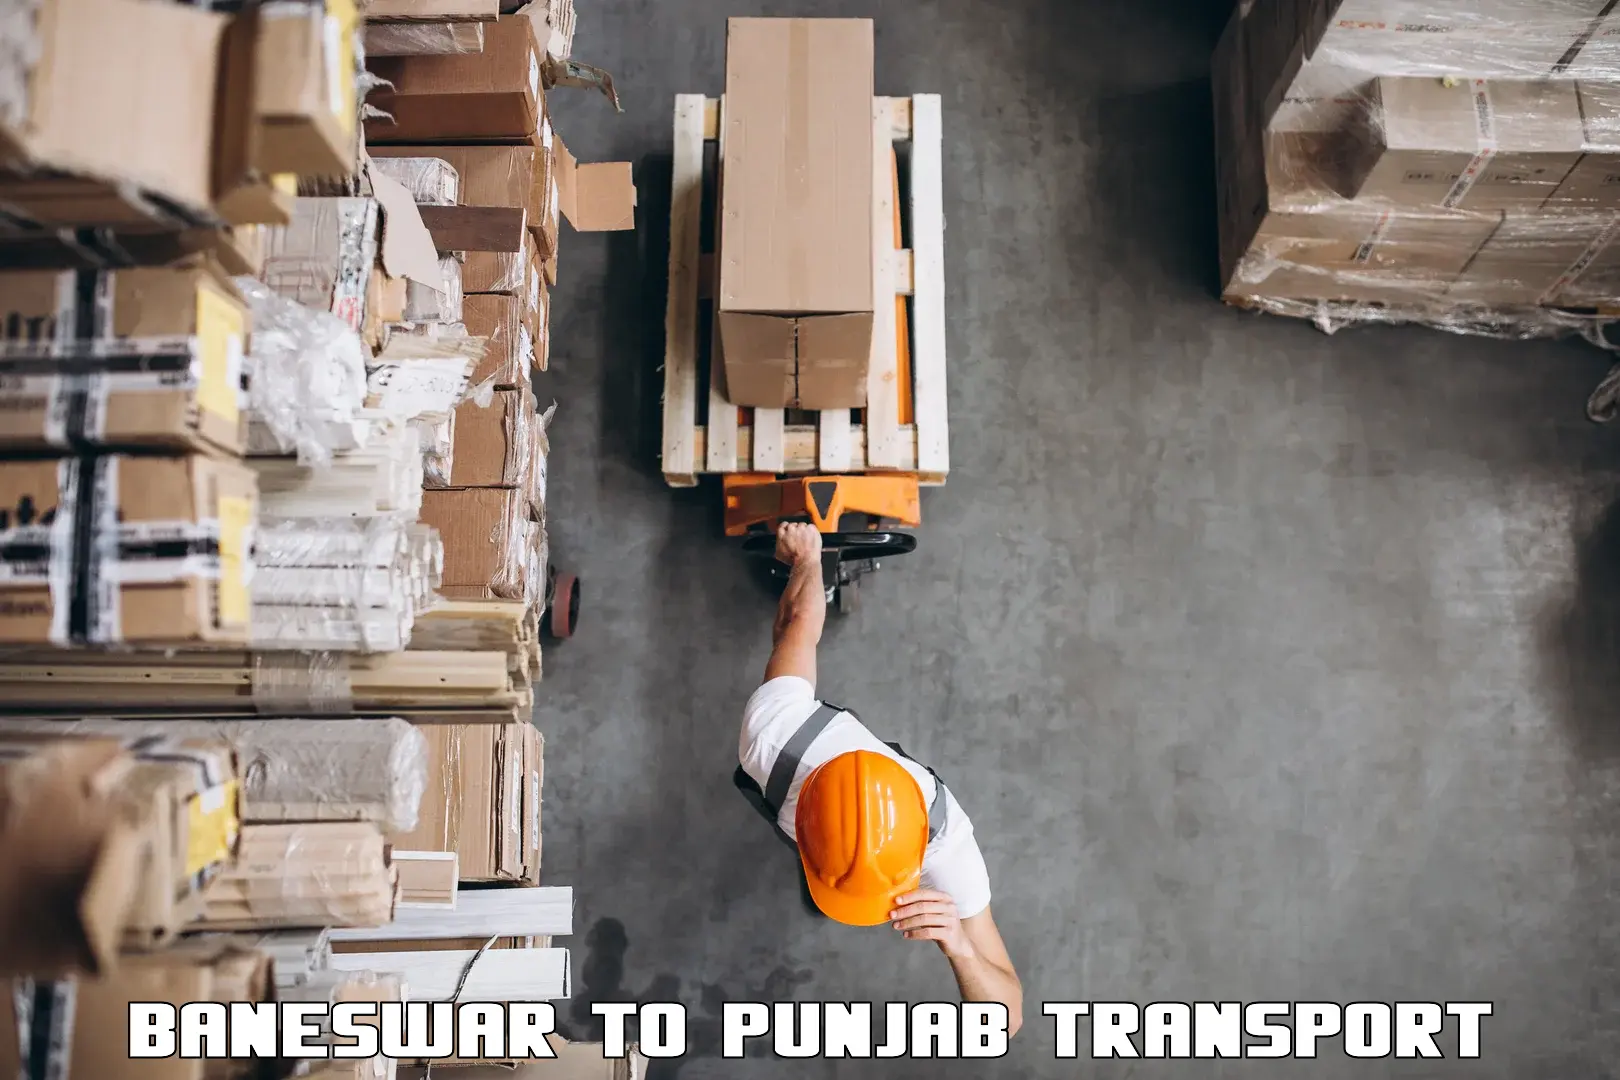 Truck transport companies in India Baneswar to Bhadaur